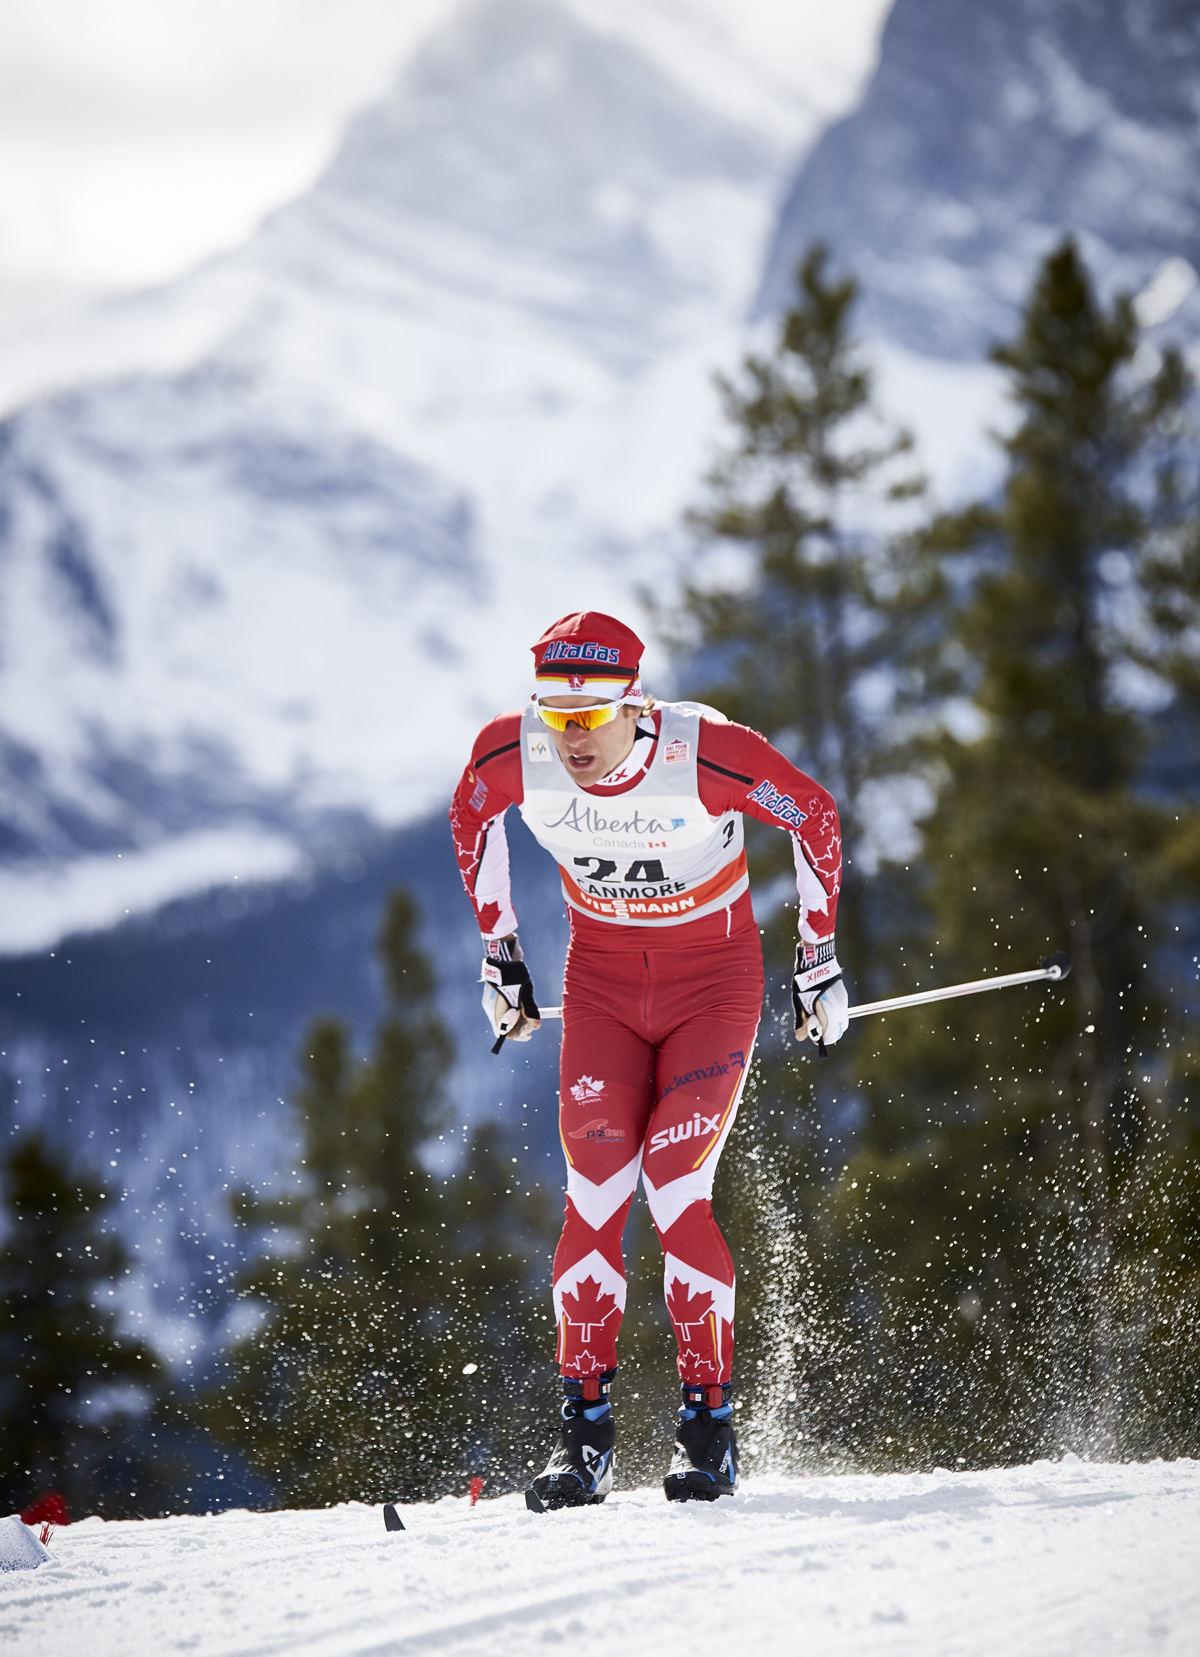 Devon Kershaw (Canadian World Cup Team) competing in the classic sprint at the Ski Tour Canada on March 8 in Canmore, Alberta. (Photo: Fischer/NordicFocus)